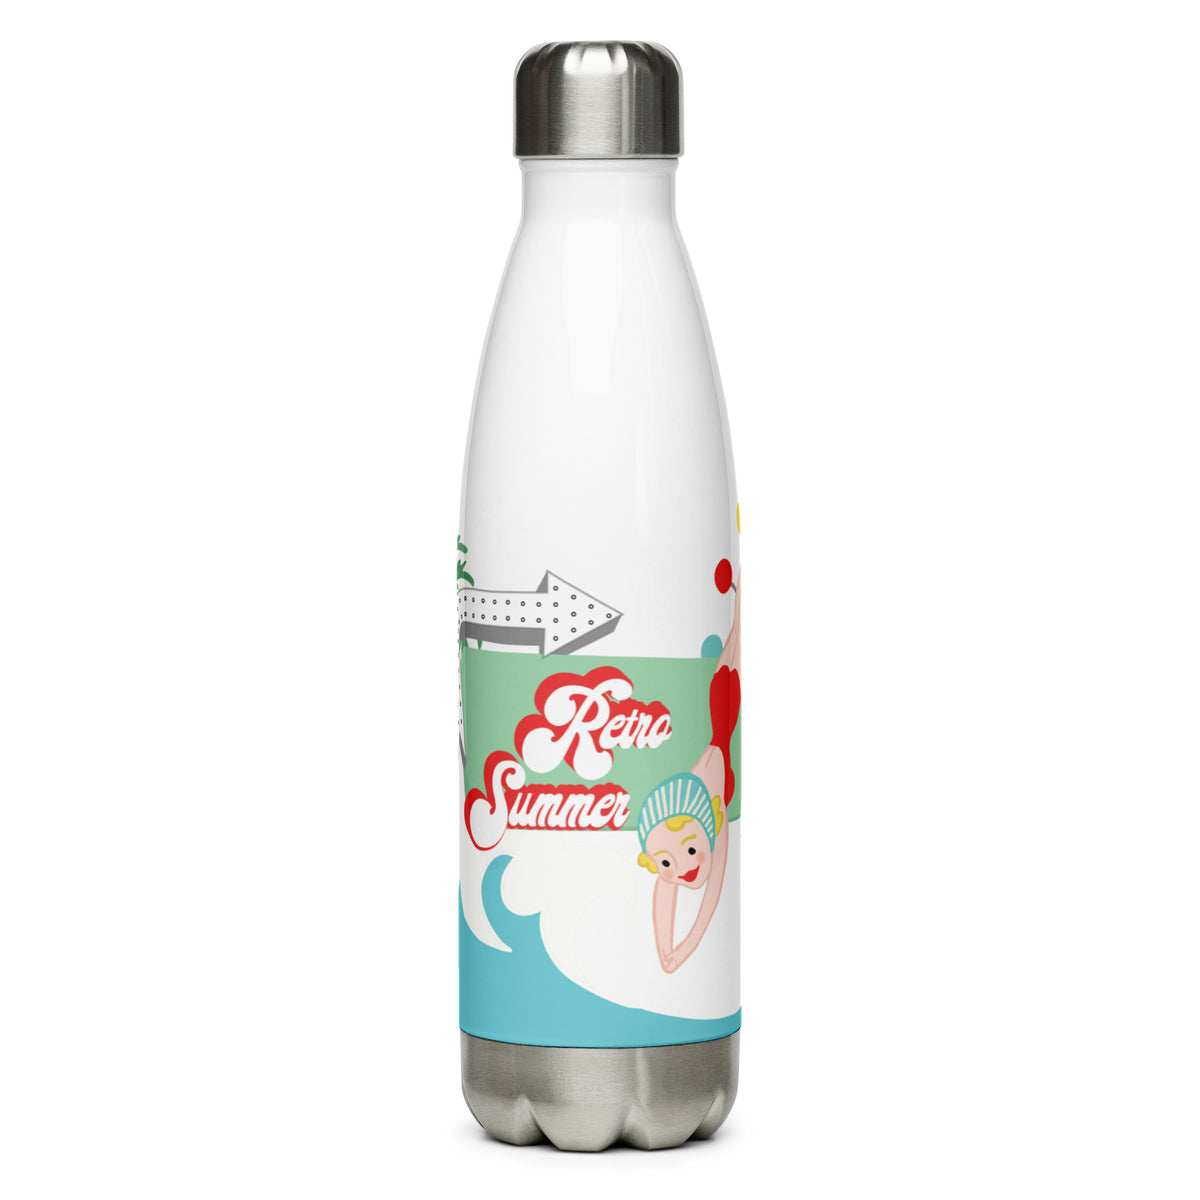 Retro Summer Stainless Steel Water Bottle **LIMITED EDITION**